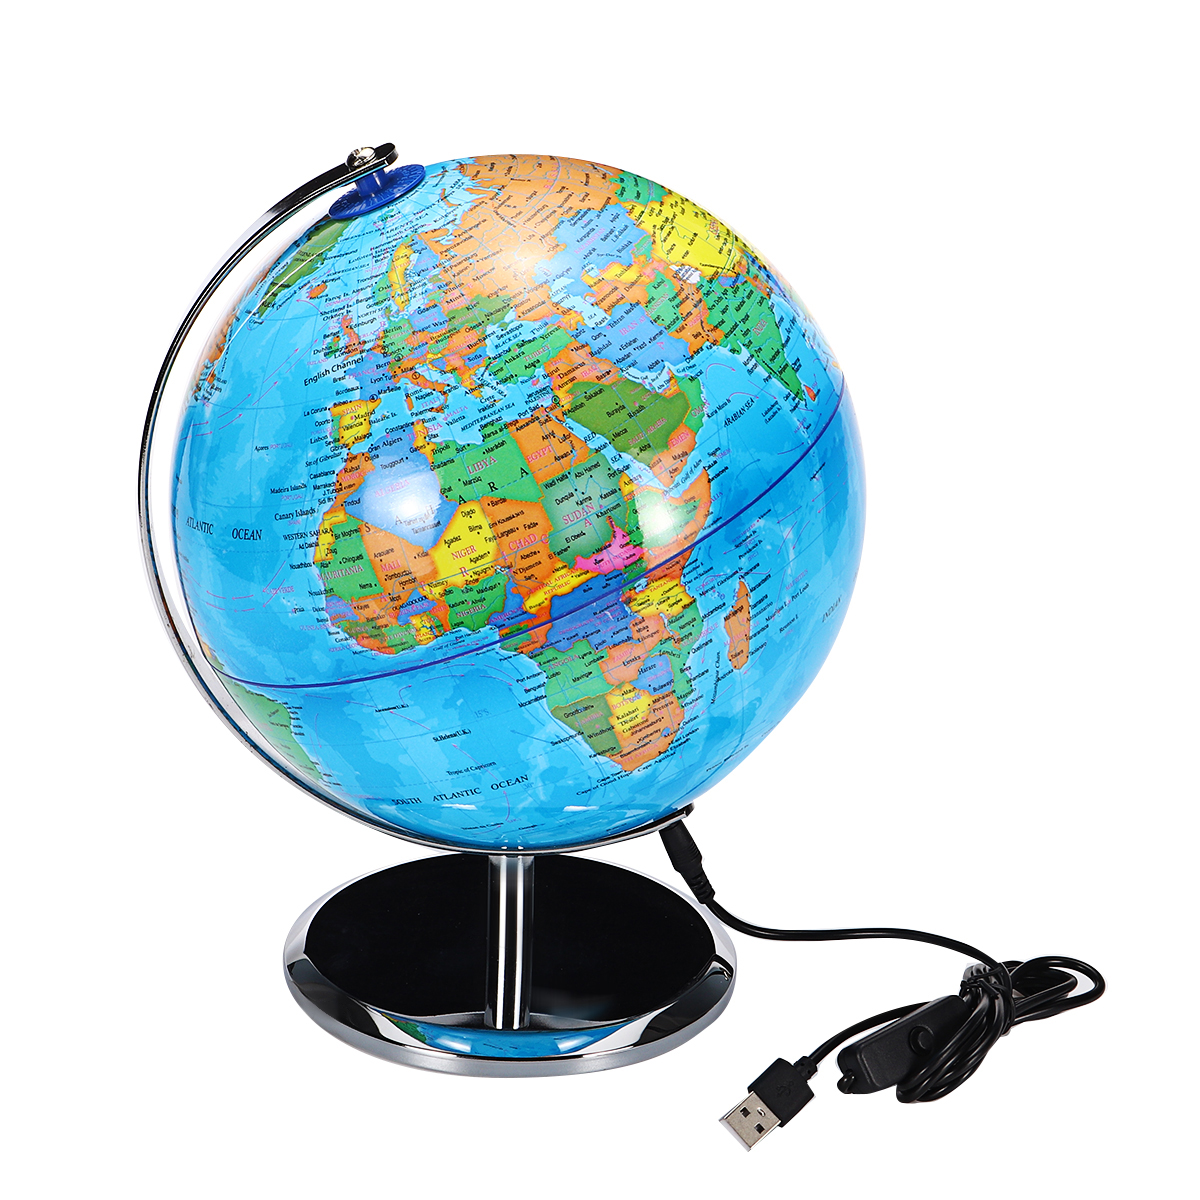 8inch-Stand-Rotating-World-Globe-Map-Kids-Toy-School-Student-Educational-Gift-1783975-5